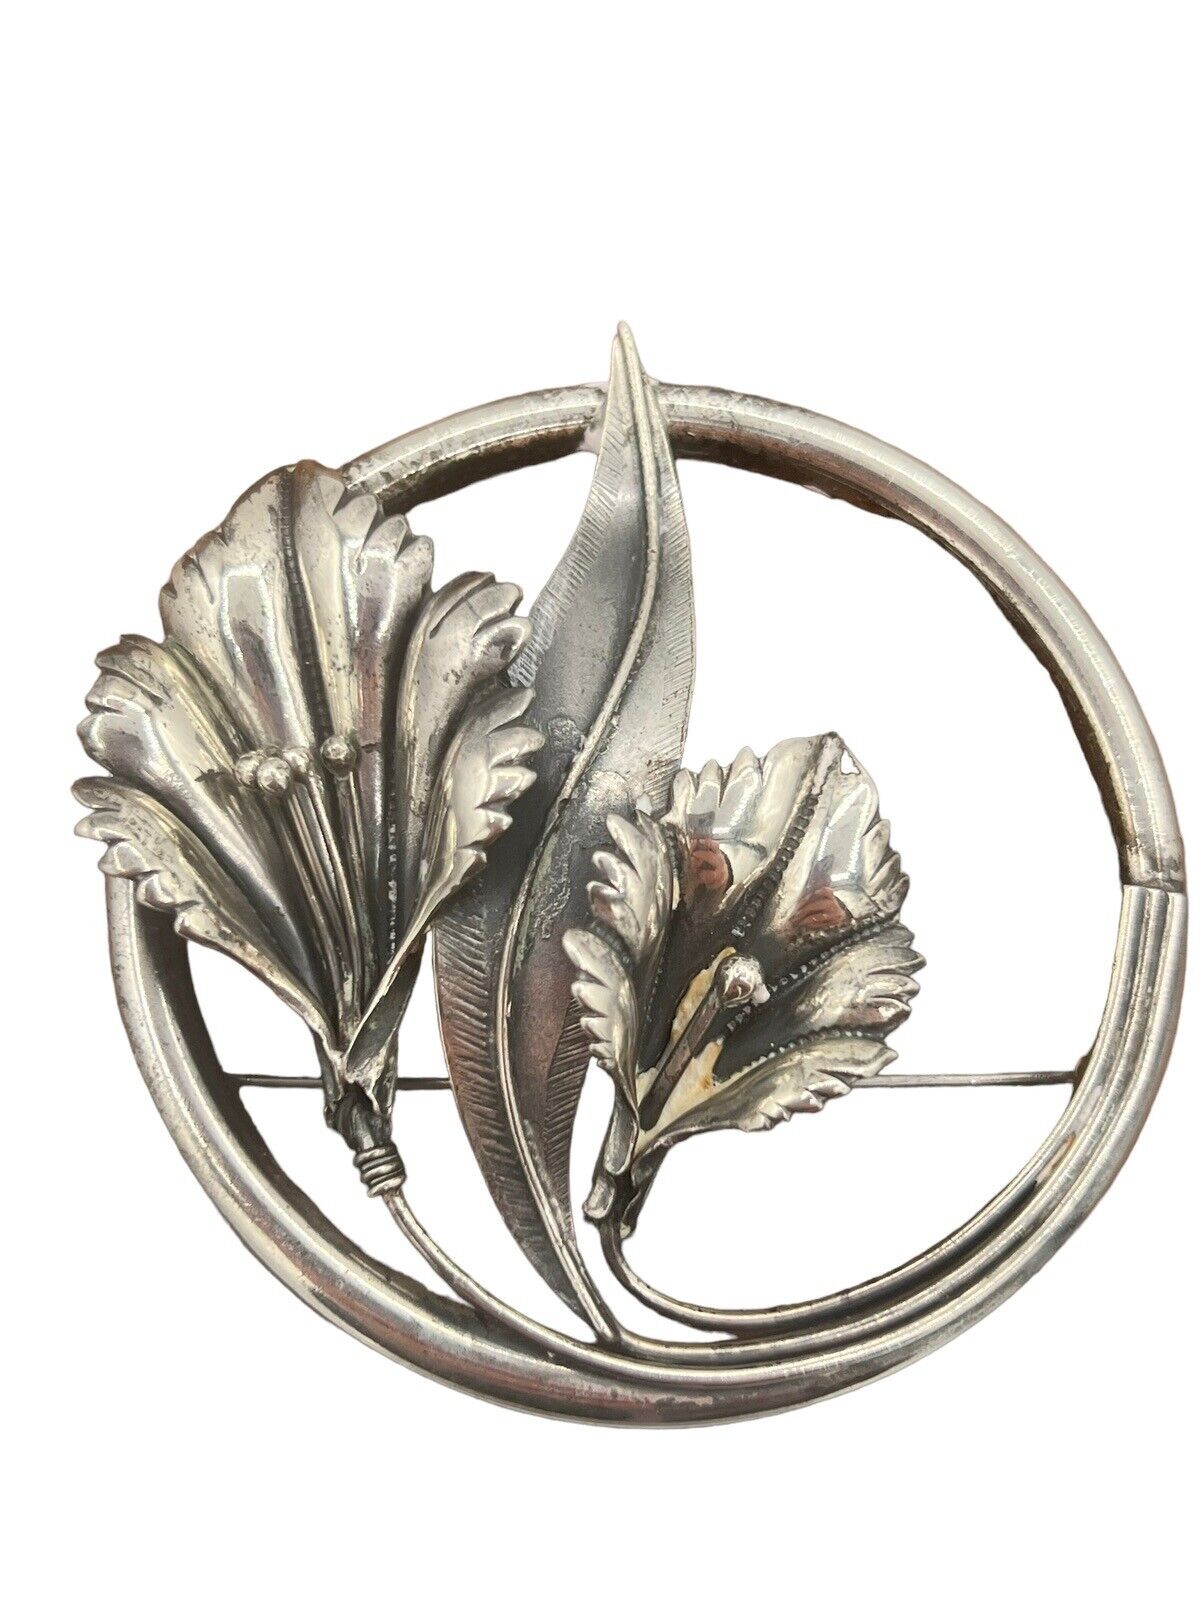 Large Art Nouveau Round 3d Flower Lily Leaf Brooch Pin 3” Marked Sterling